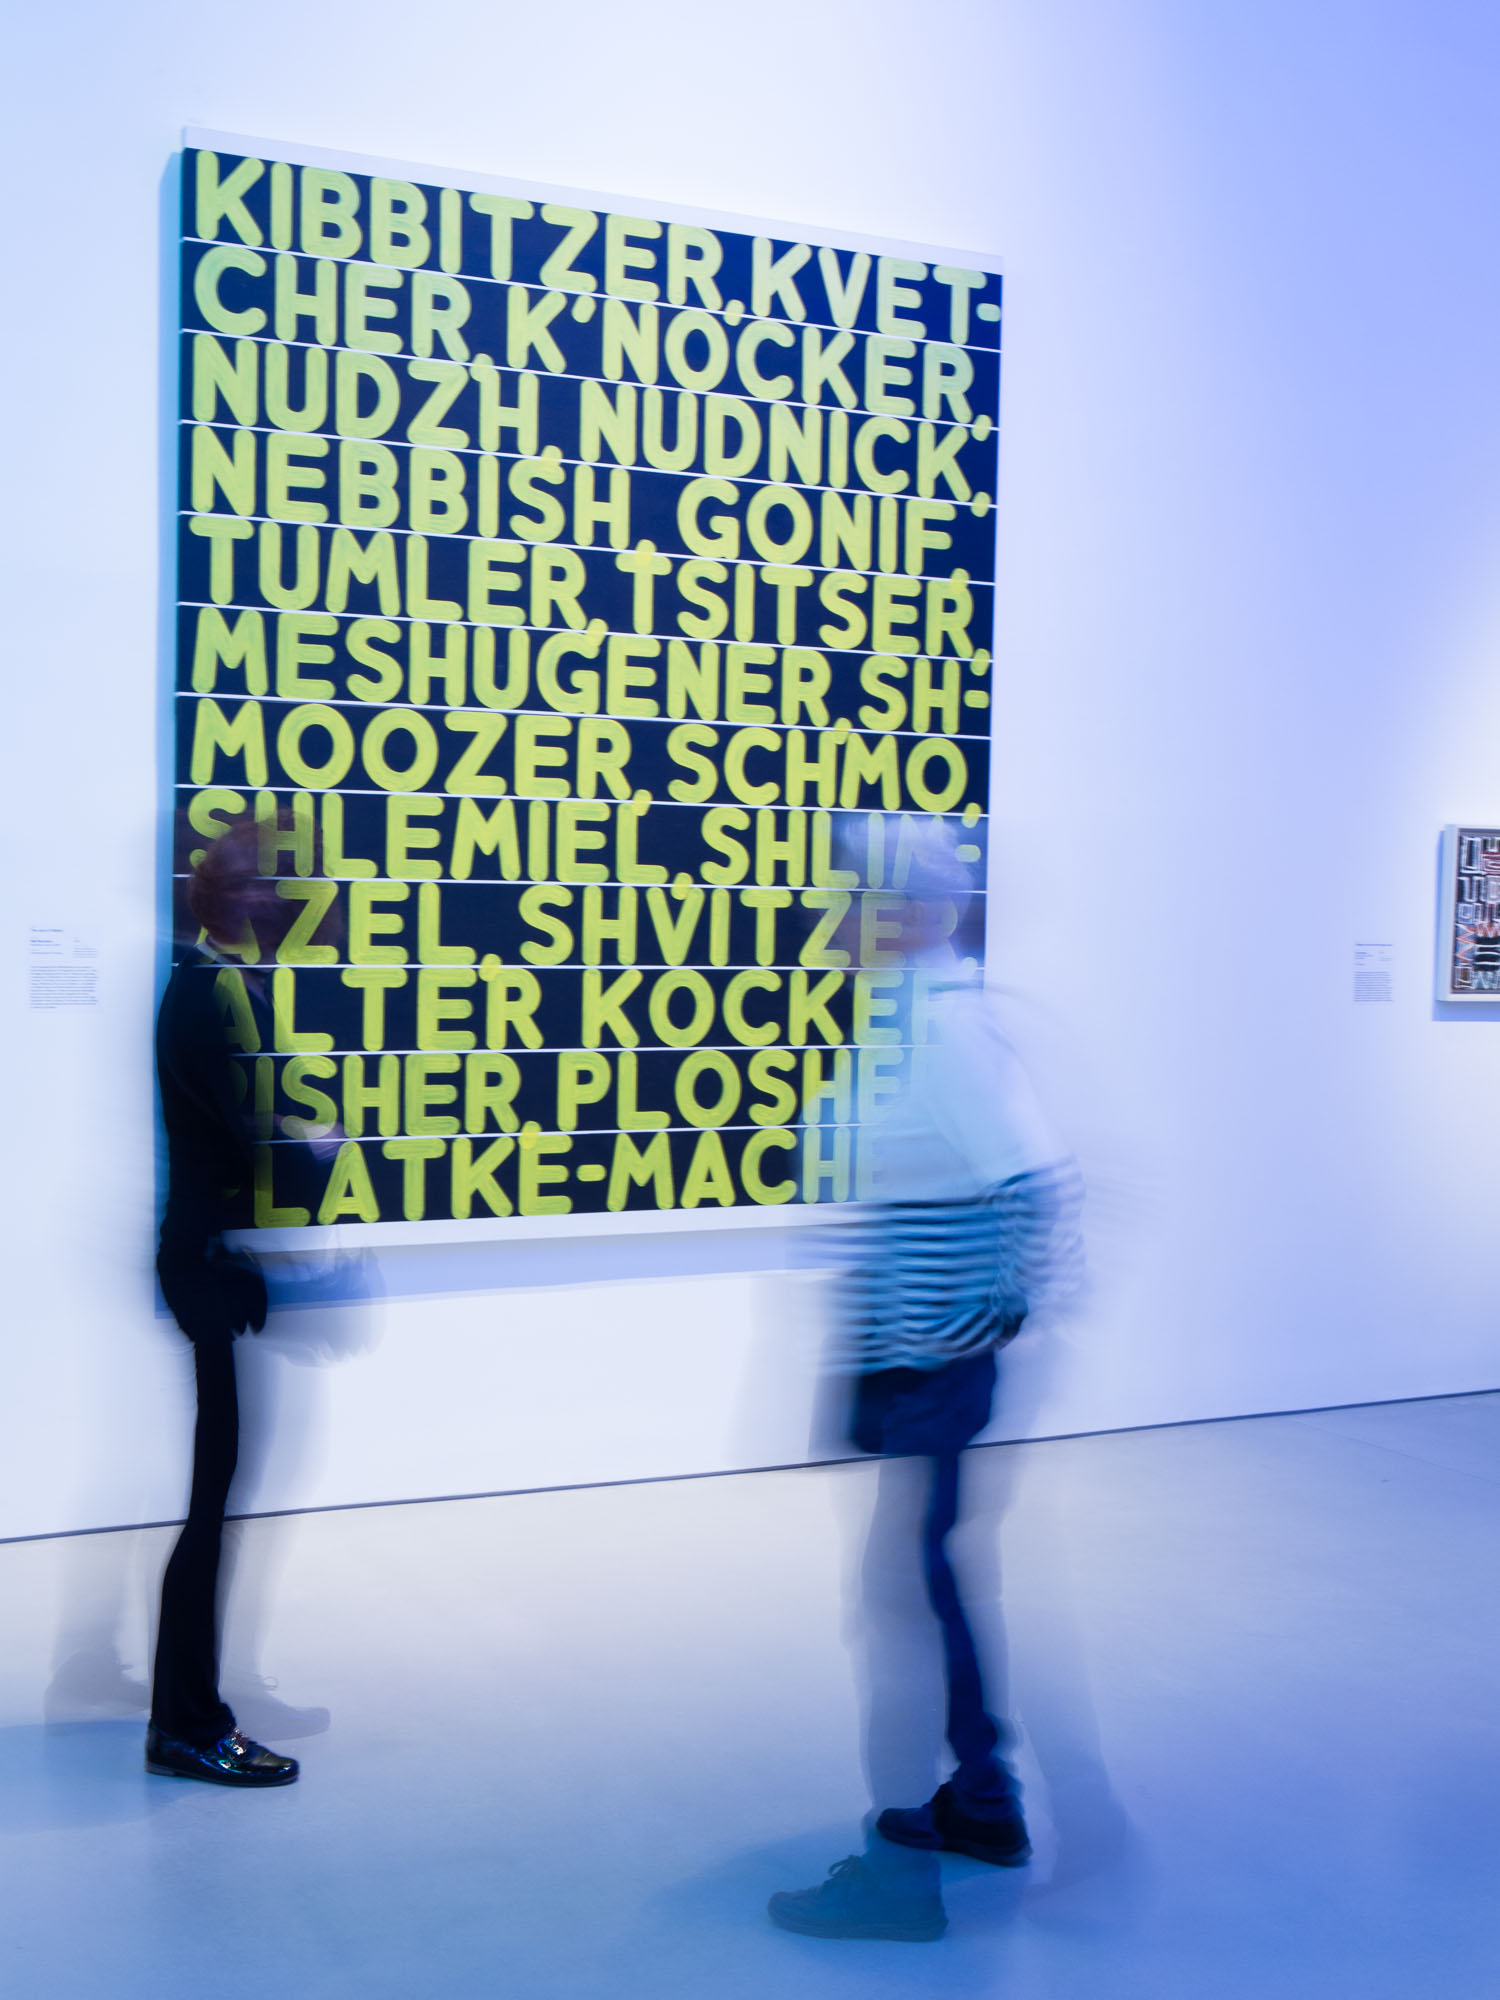 Blurred visitors look at Mel Bochner's painting "The Joys of Yiddish" in the Jewish Museum.